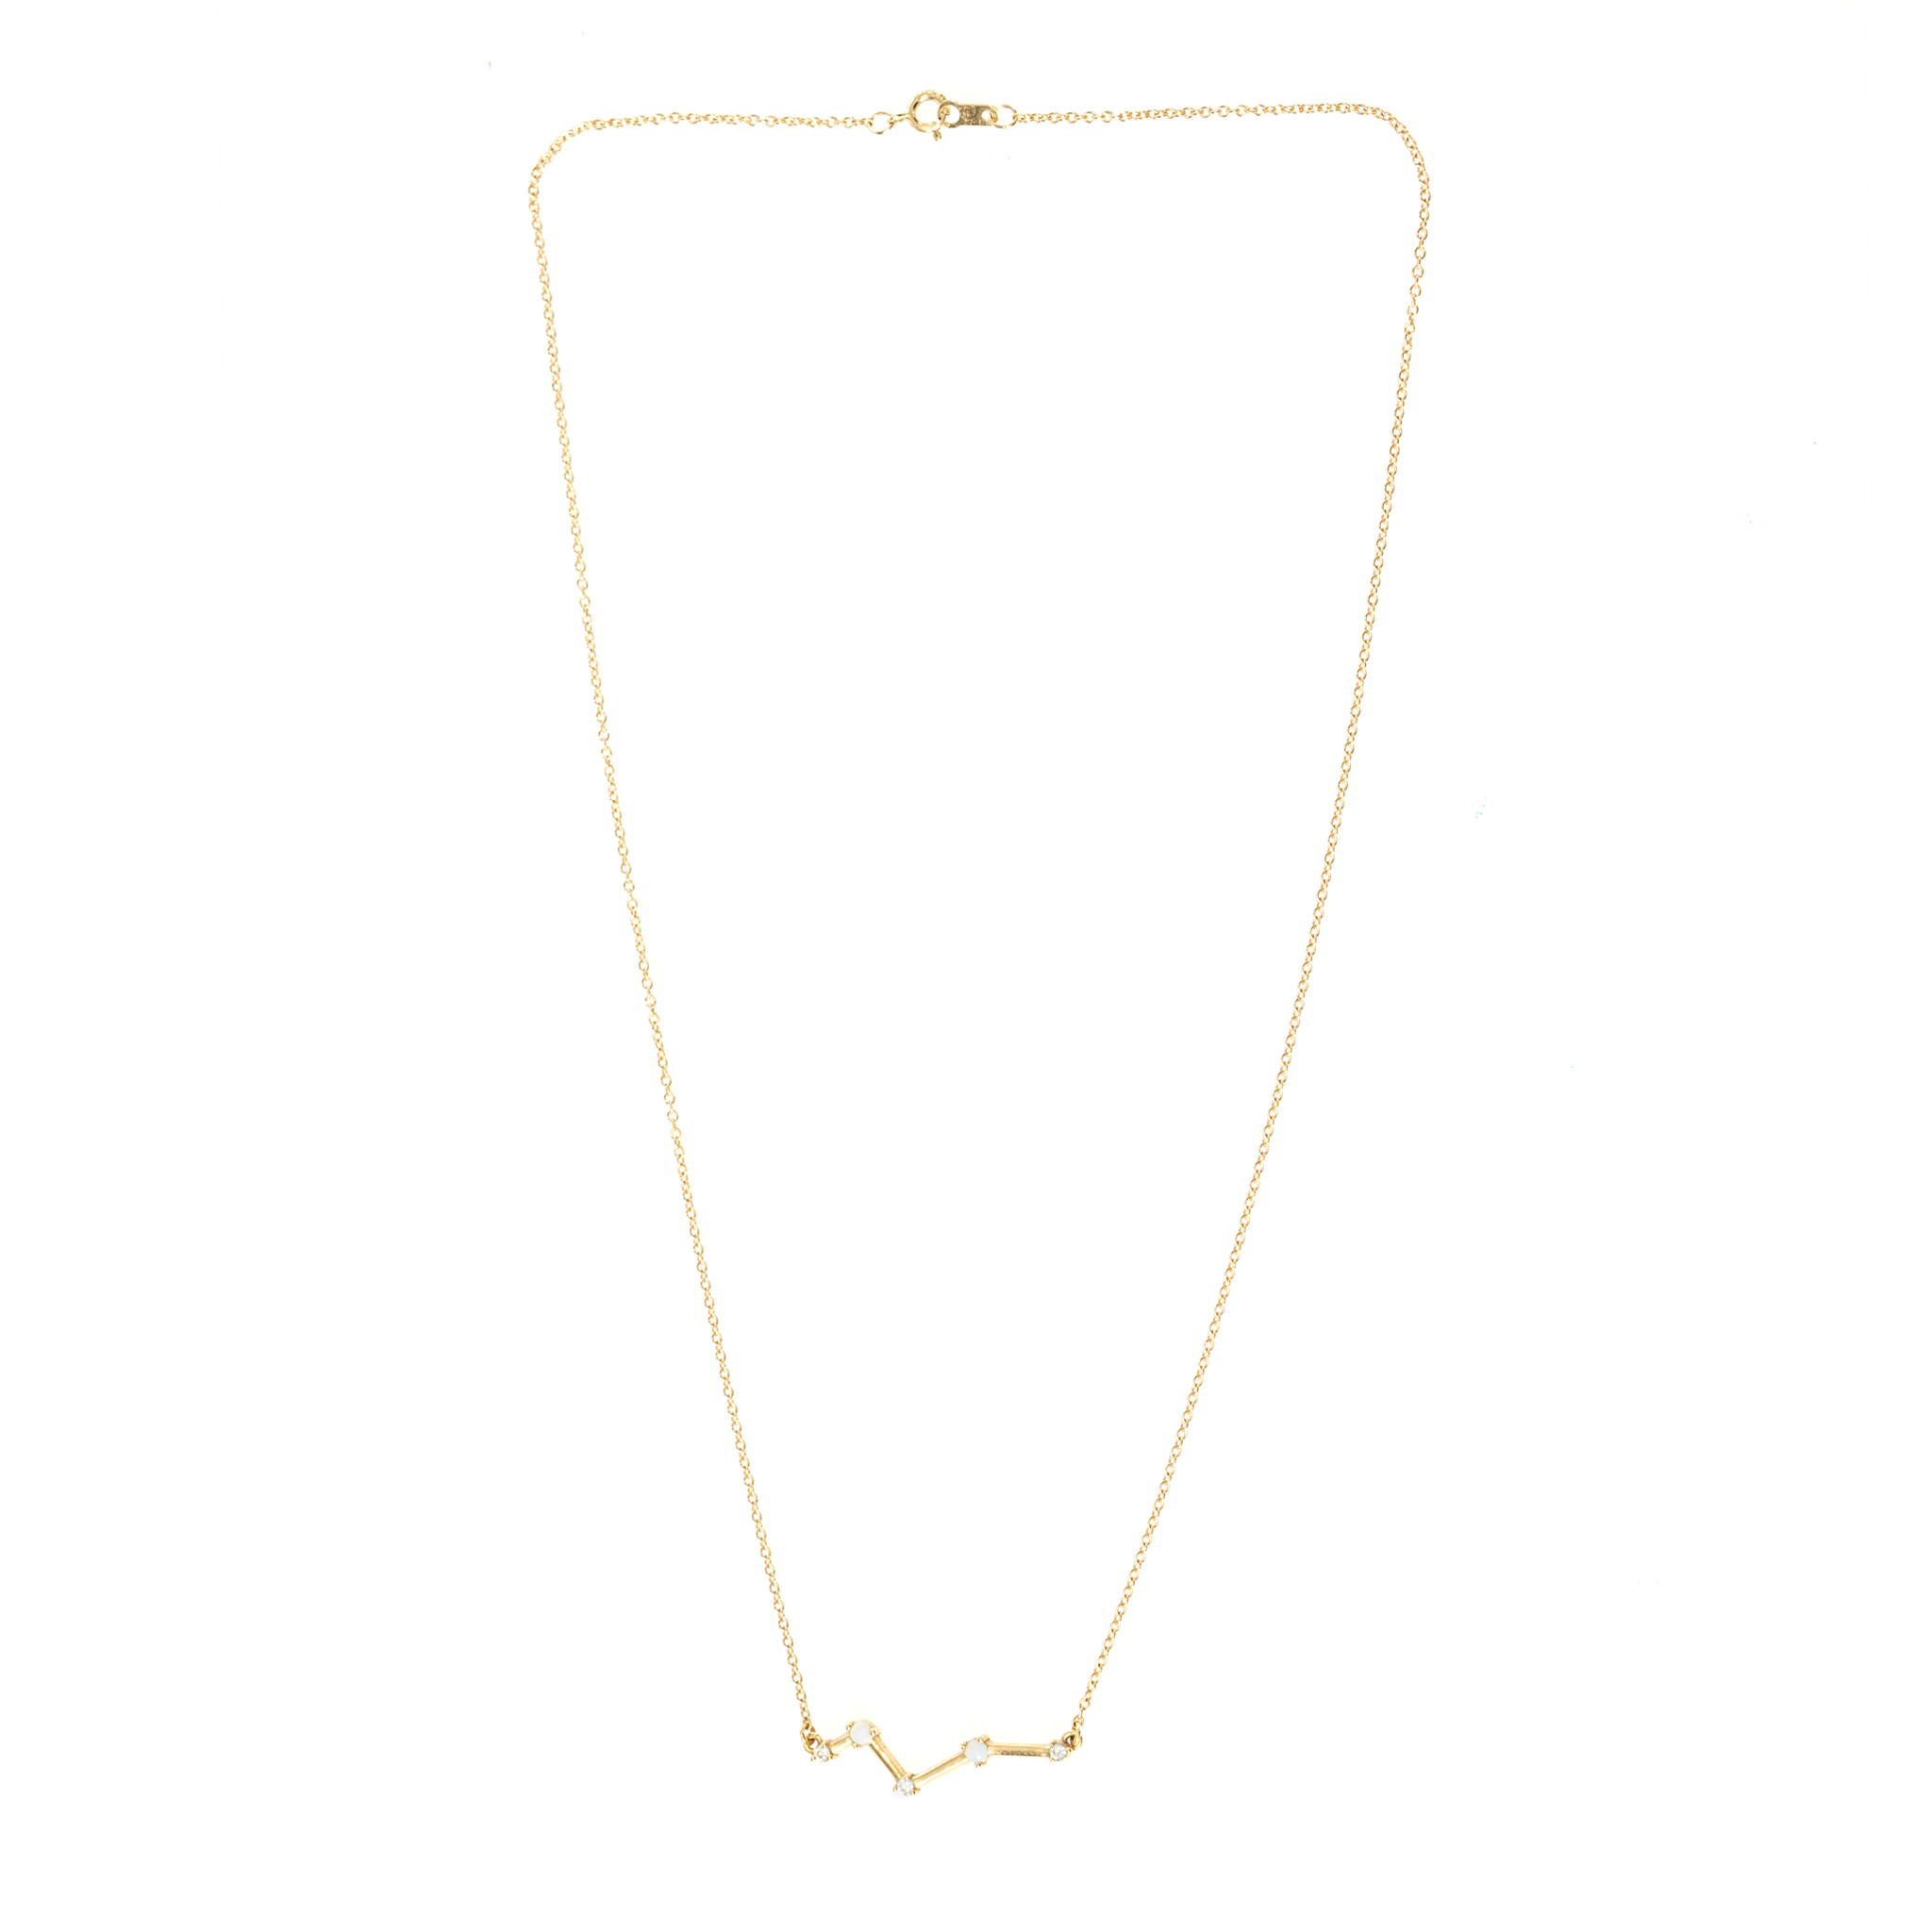 14K GOLD OPAL AND DIAMOND CONSTELLATION BAR NECKLACE